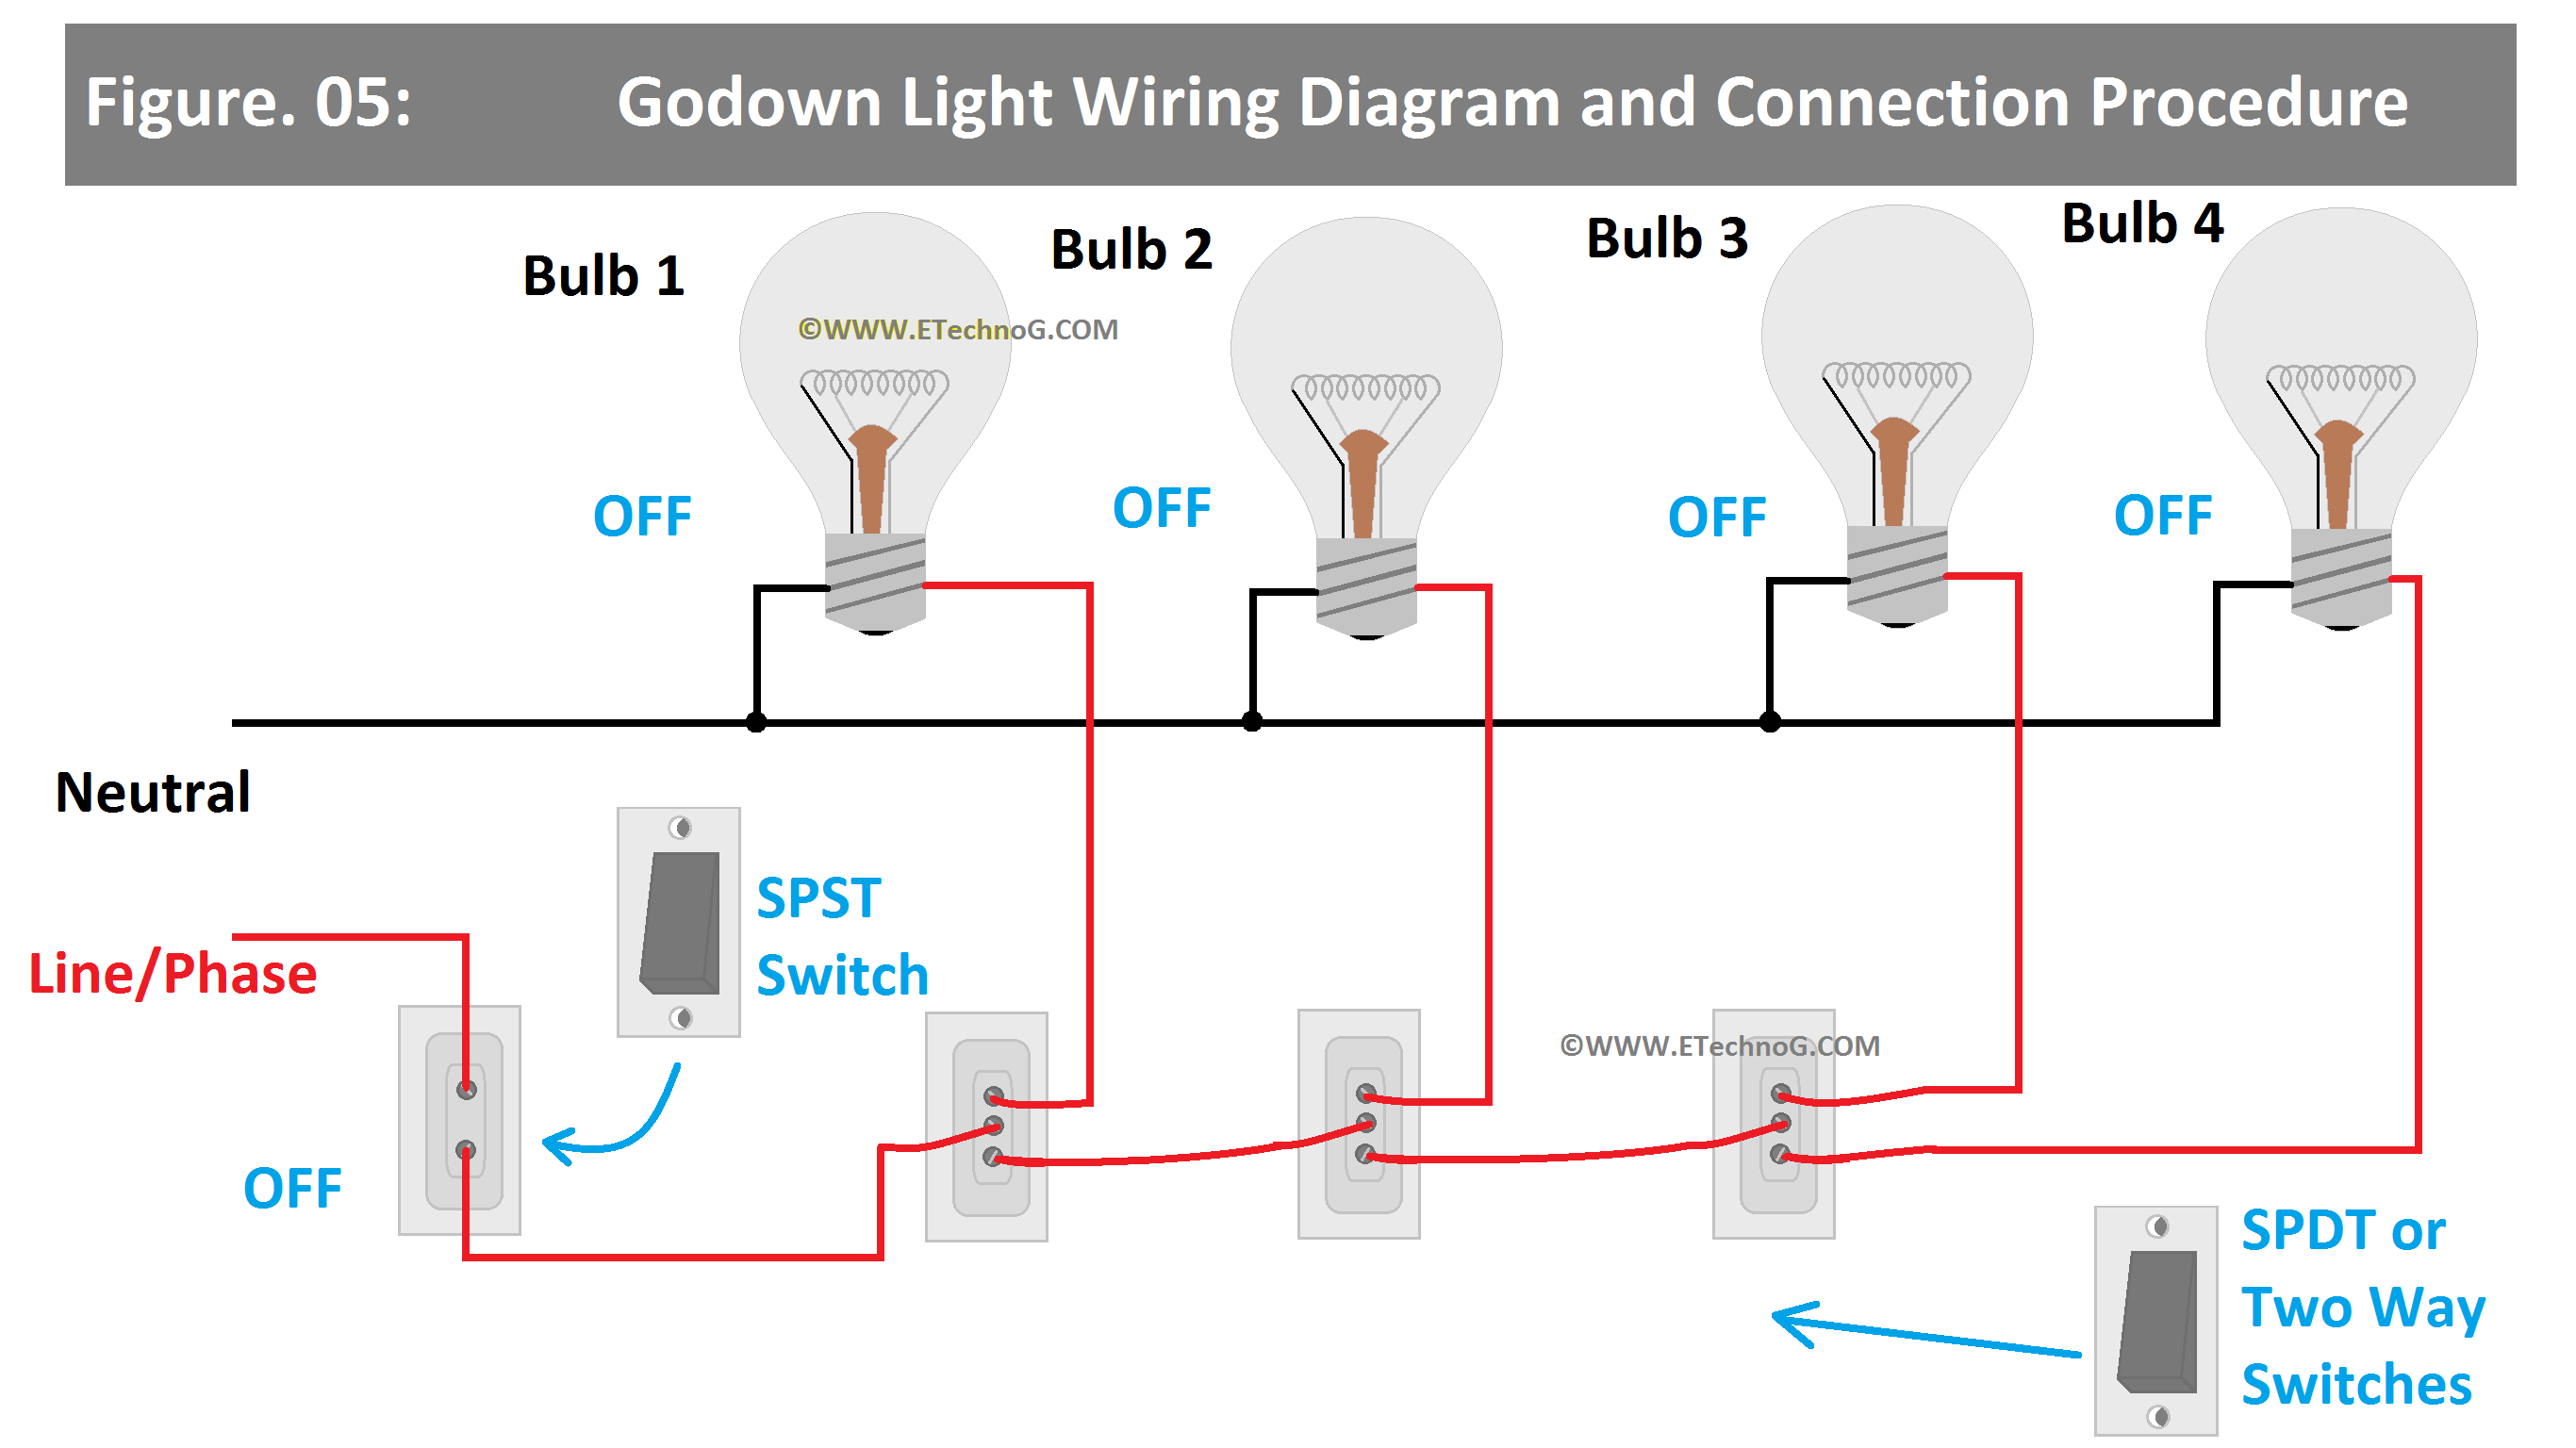 Godown Light Operating Principle(Turn off all lamps)